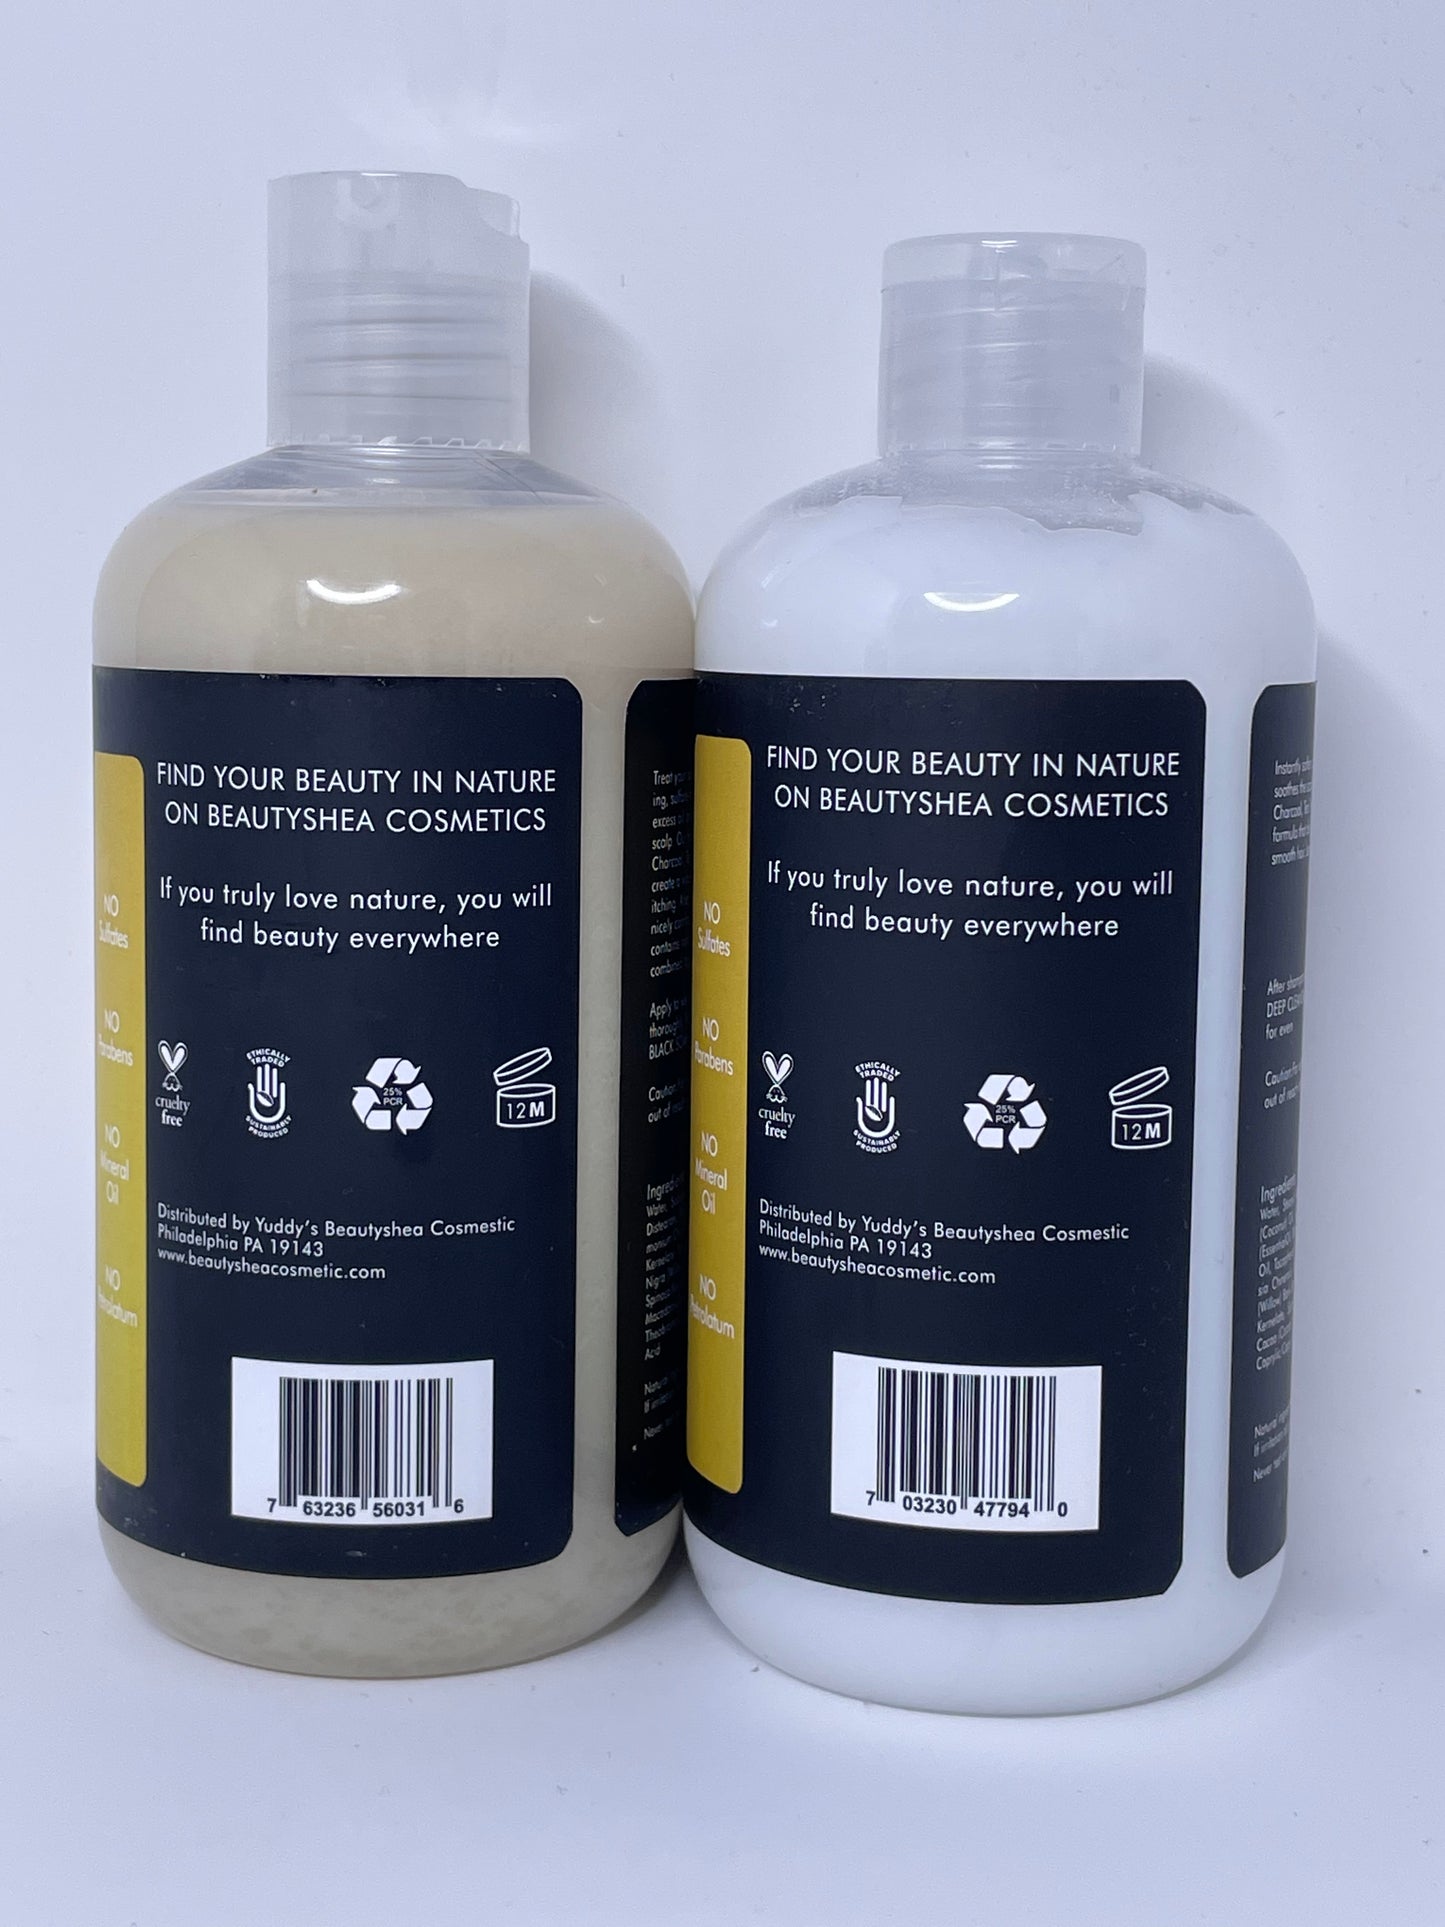 Bamboo Charcoal Deep Cleansing Shampoo & Balancing Conditioner